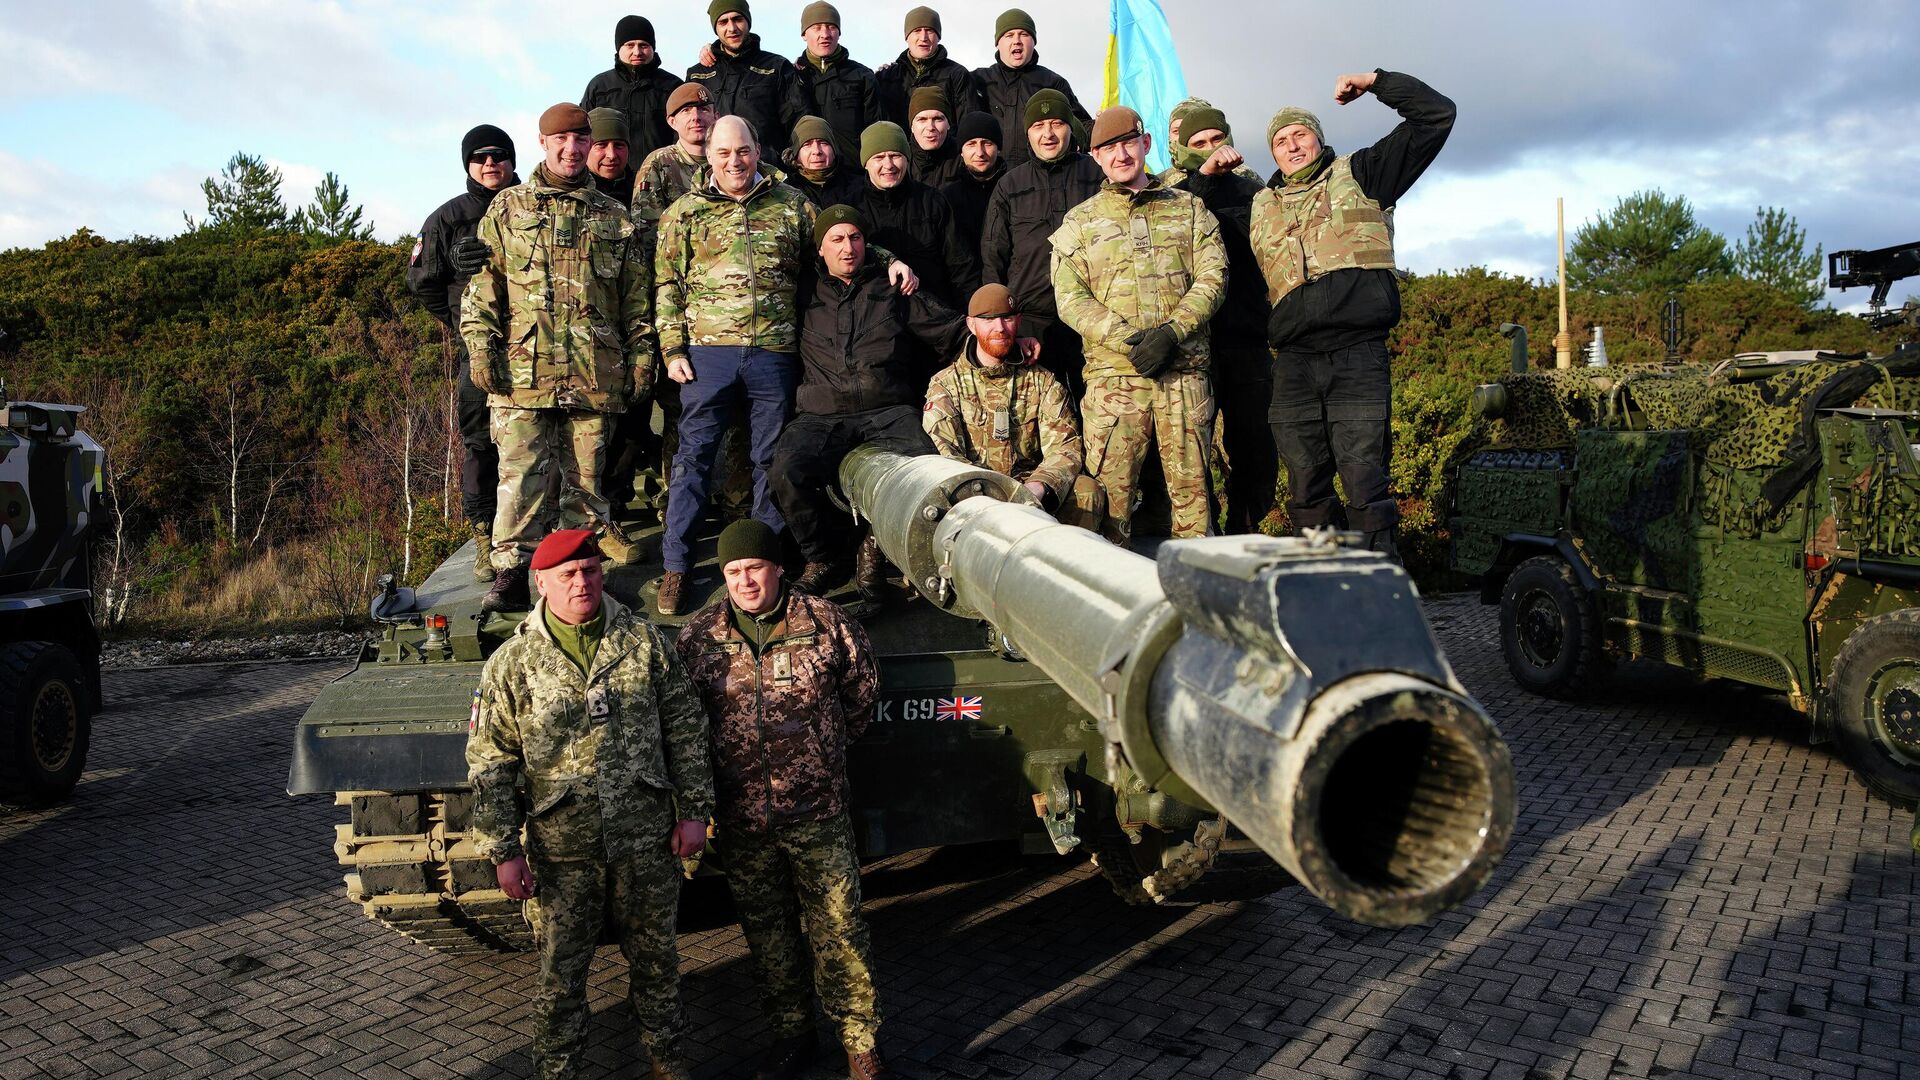 Britain's Defense Secretary Ben Wallace, centre left, poses with Ukrainian soldiers during a visit at Bovington Camp, a British Army military base where they are training on Challenger 2 tanks, in Dorset, England, February 2023.  - Sputnik International, 1920, 05.09.2023